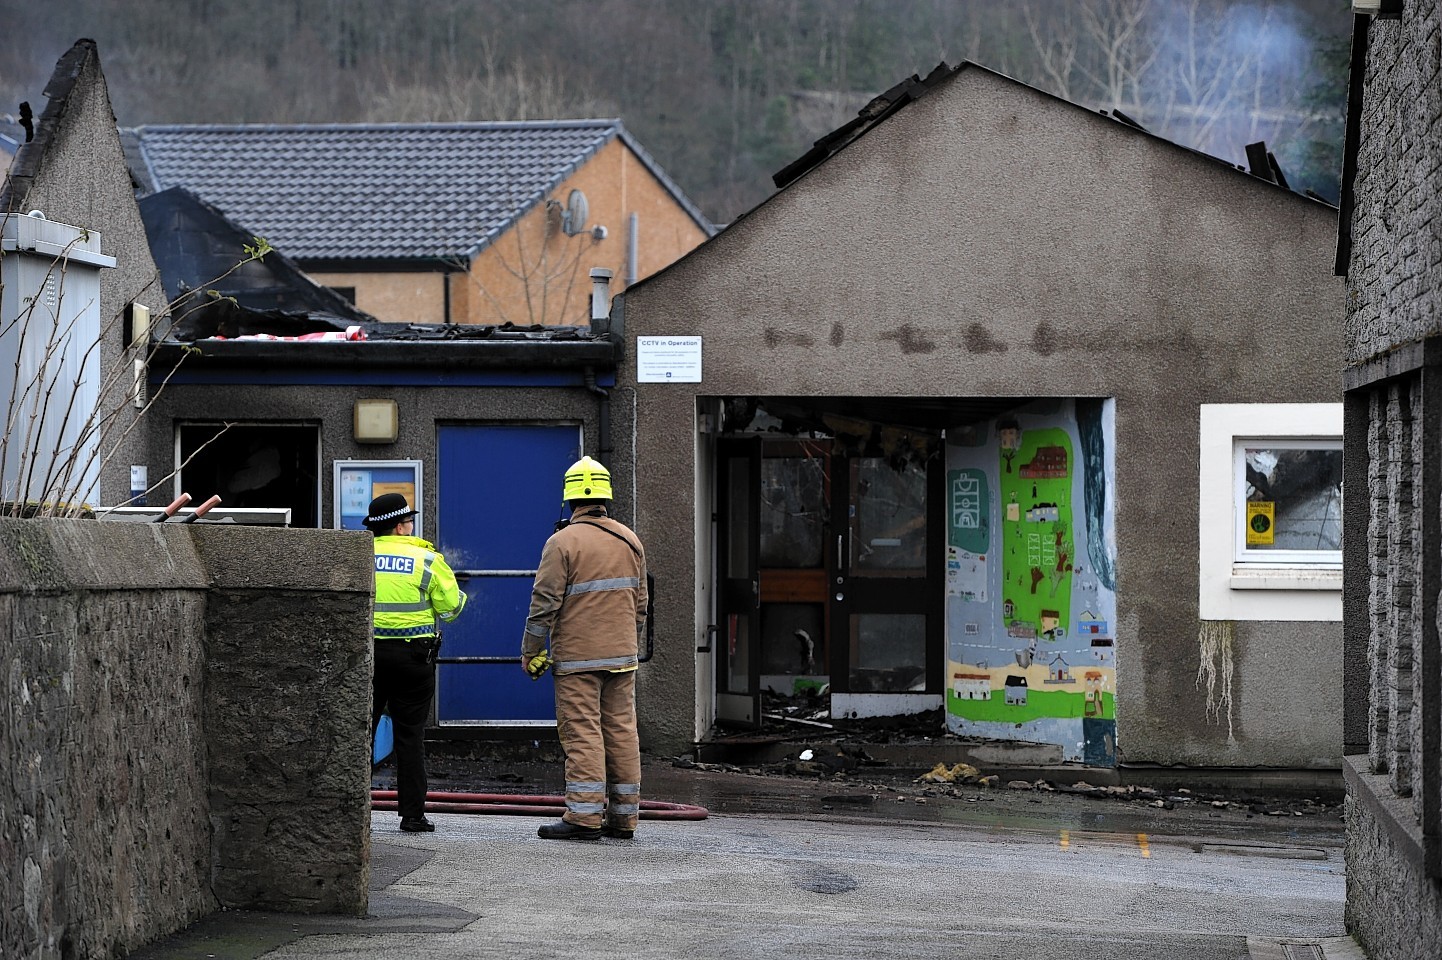 An investigation has been launched into the blaze at Kinellar School